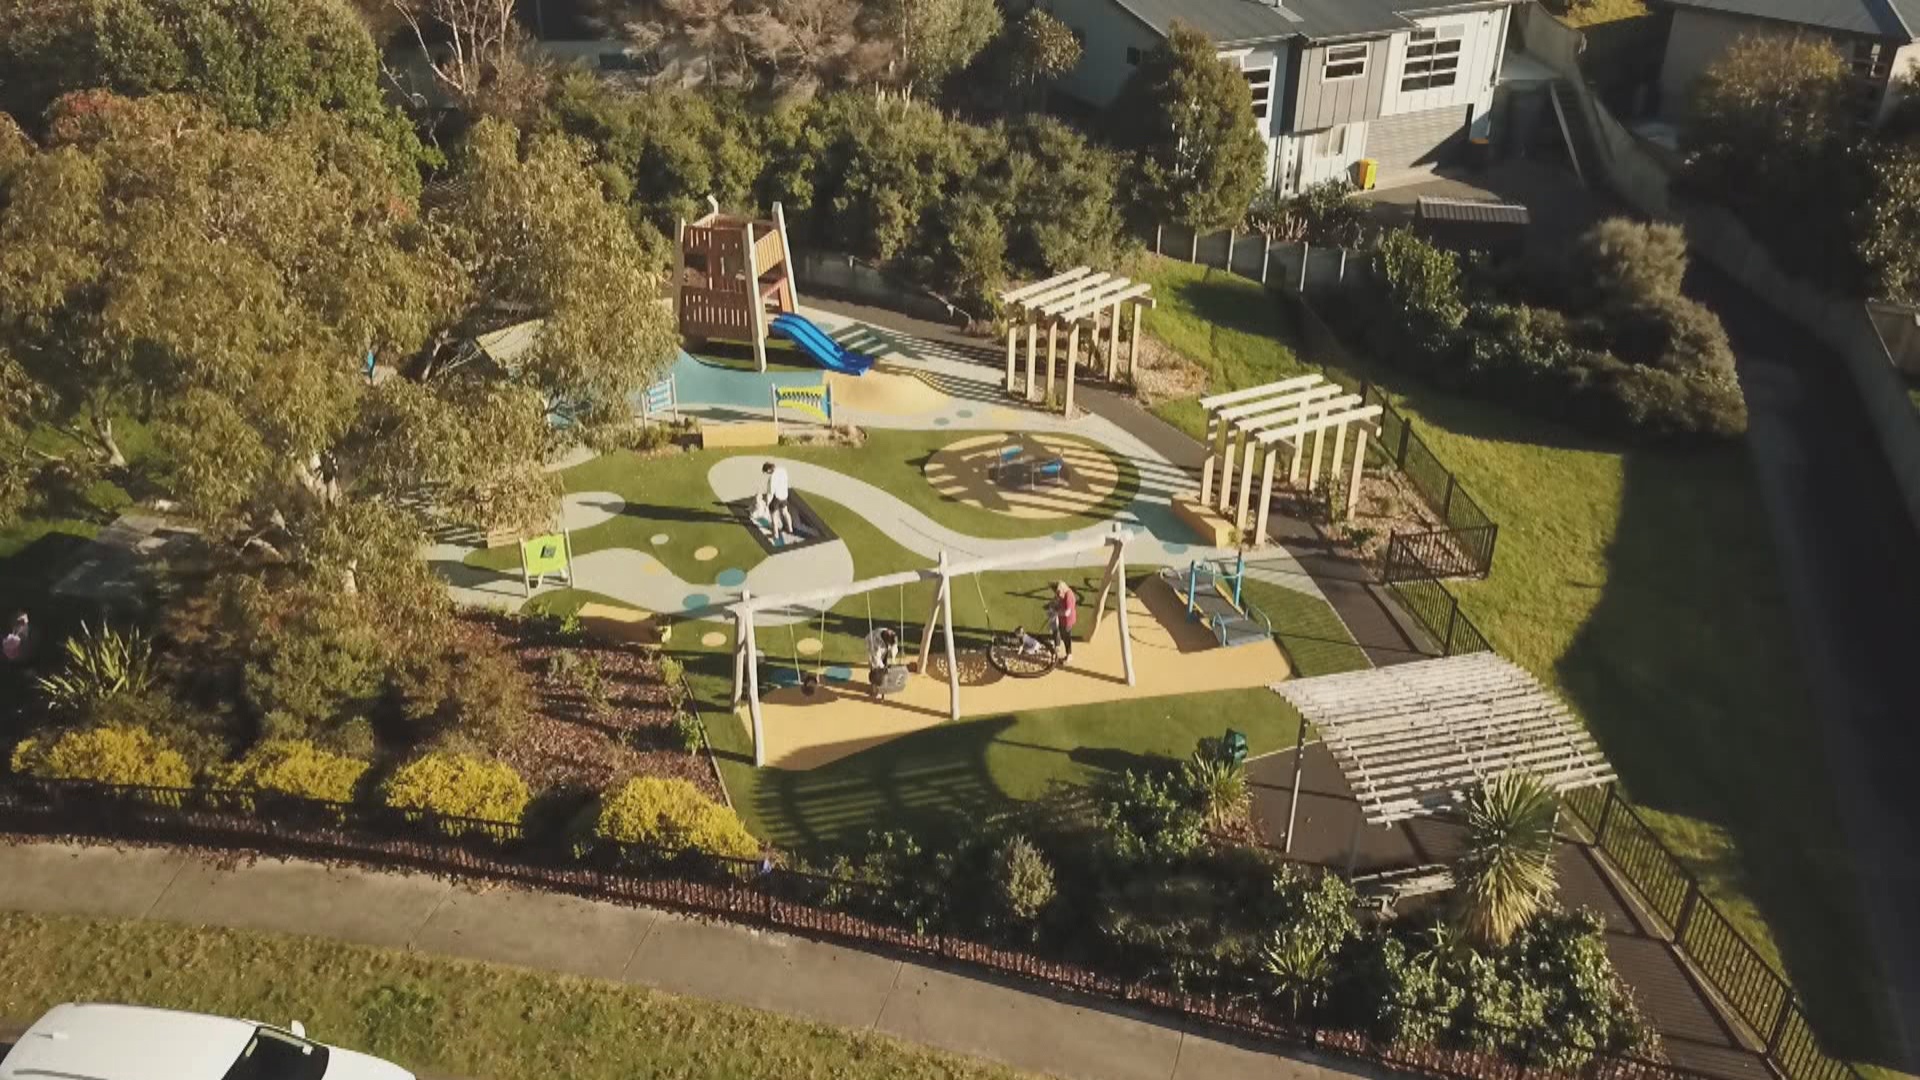 Parents of disabled kids ask to help with playground design